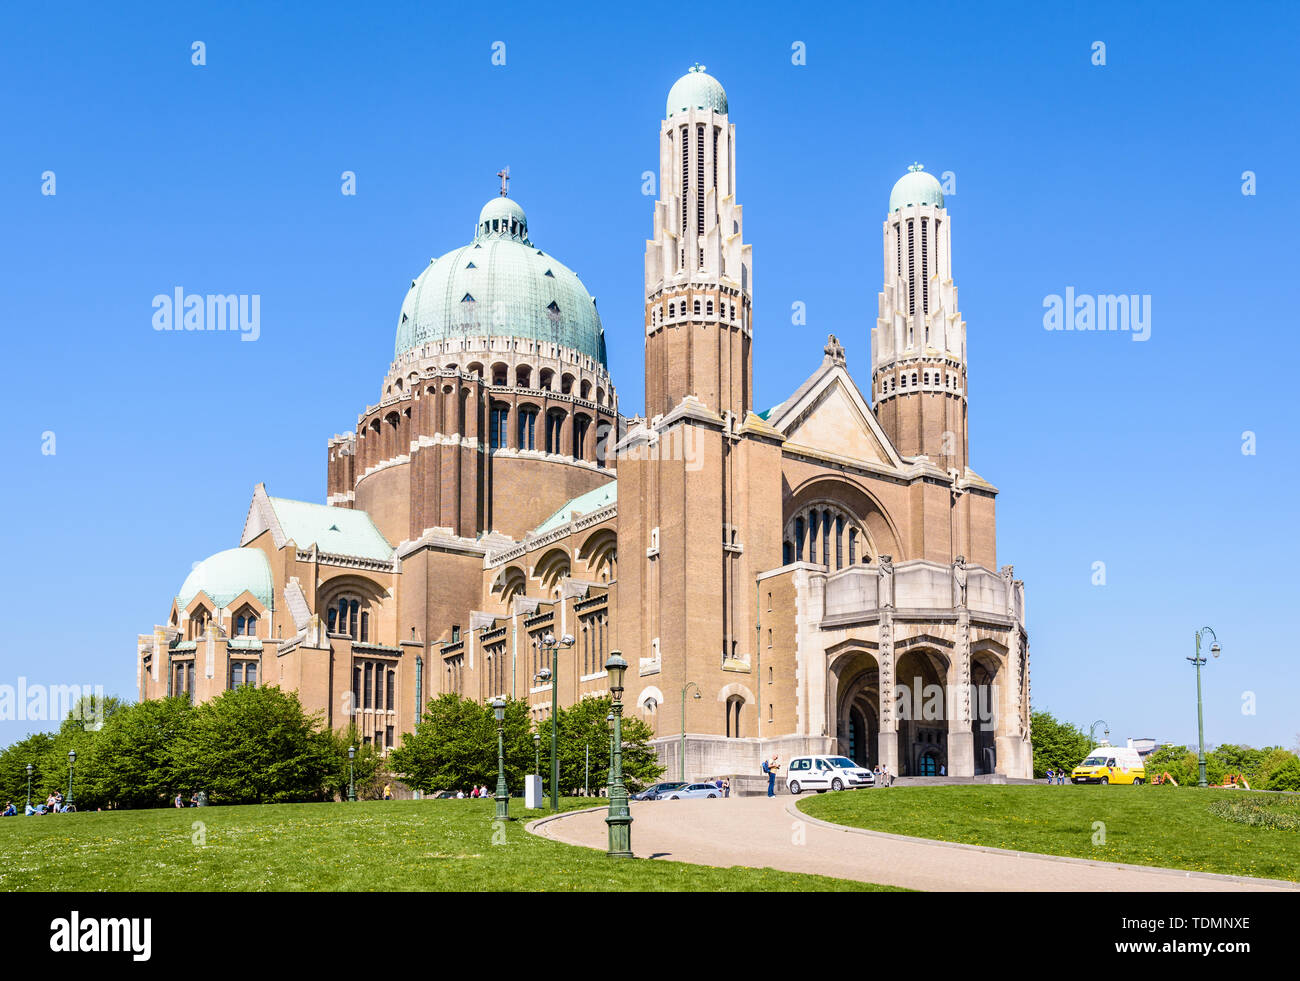 Three-quarter front view of the National Basilica of the Sacred Heart, located in the Elisabeth park in Koekelberg, Brussels-Capital region, Belgium. Stock Photo